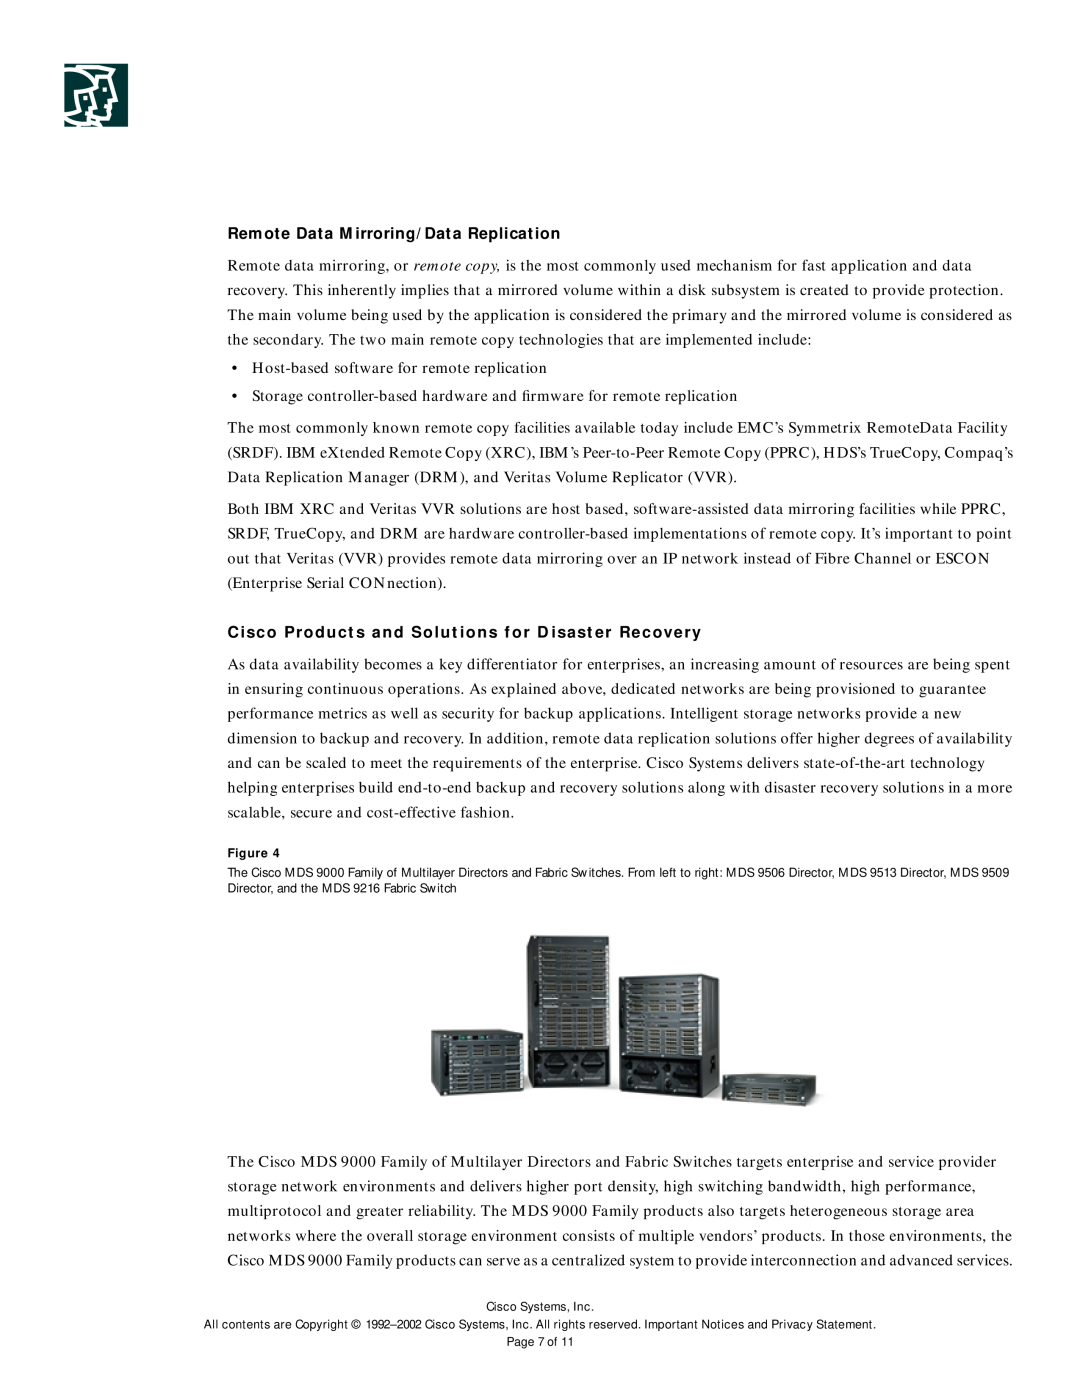 Cisco Systems MDS 9000 manual Remote Data Mirroring/Data Replication, Cisco Products and Solutions for Disaster Recovery 